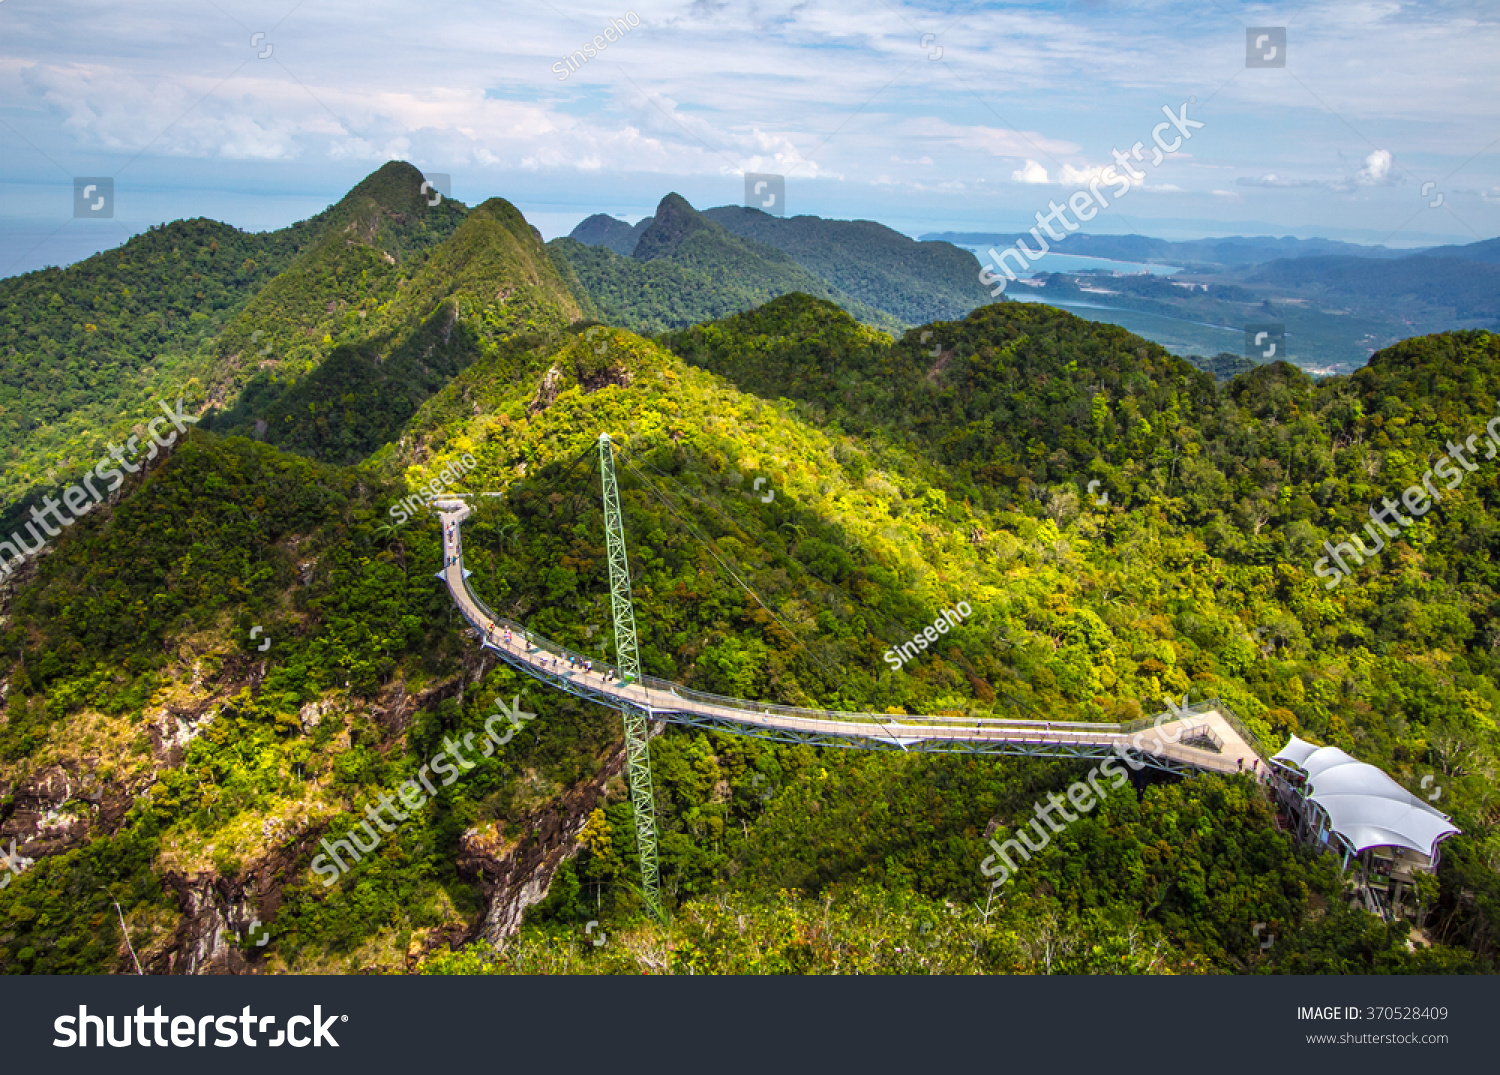 View of Langkawi Sky Bridge from a higher vantage point #370528409